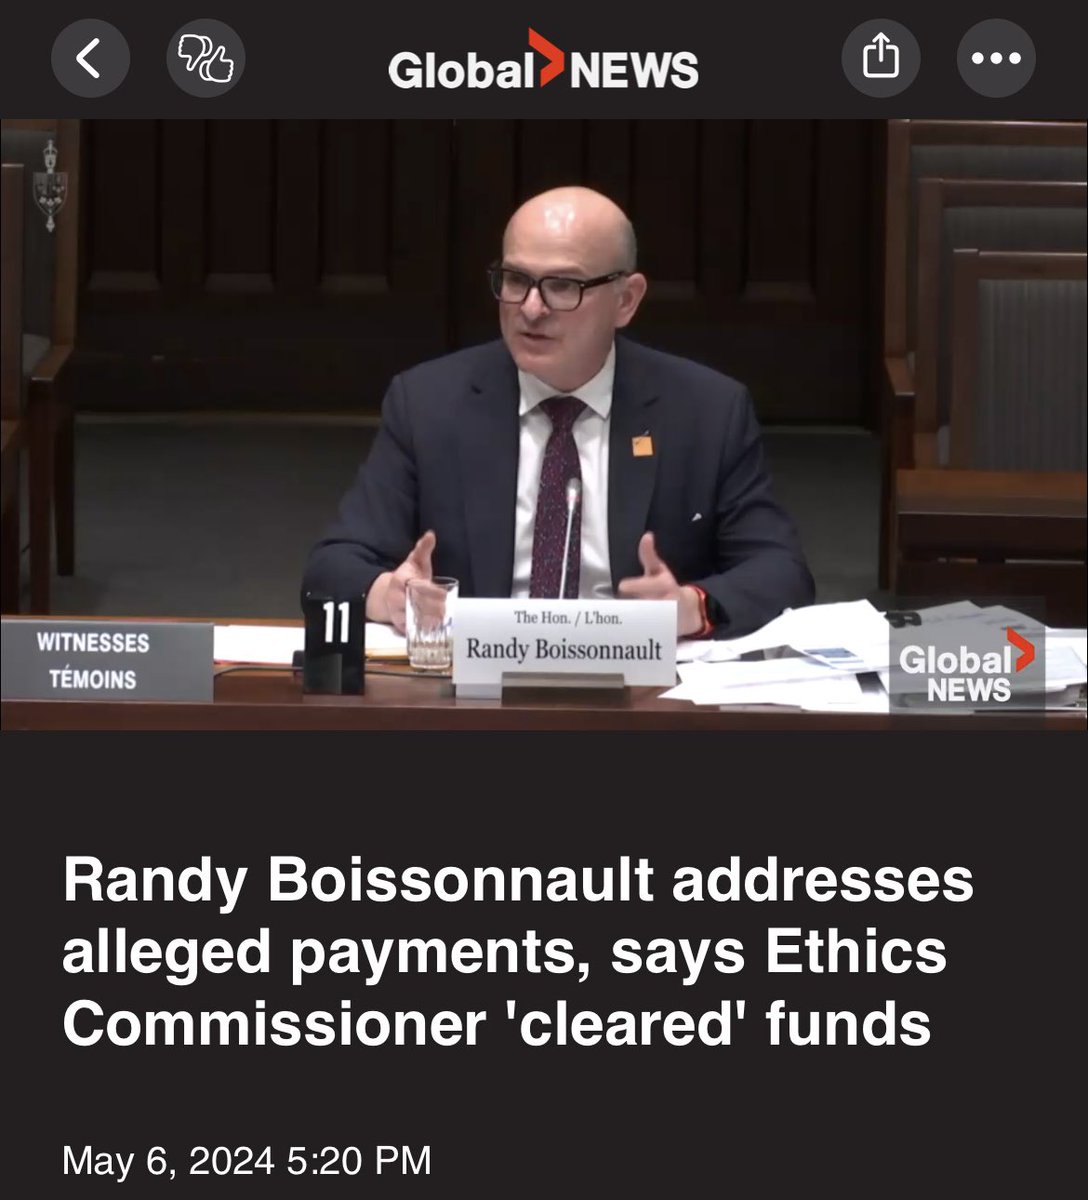 Liberal Minister’s lies exposed. 

Minister Boissonnault hid the name of the company he got paid from that was lobbying his own department. 

Turns out the Ethics Commissioner’s office didn’t know about the undisclosed connection.